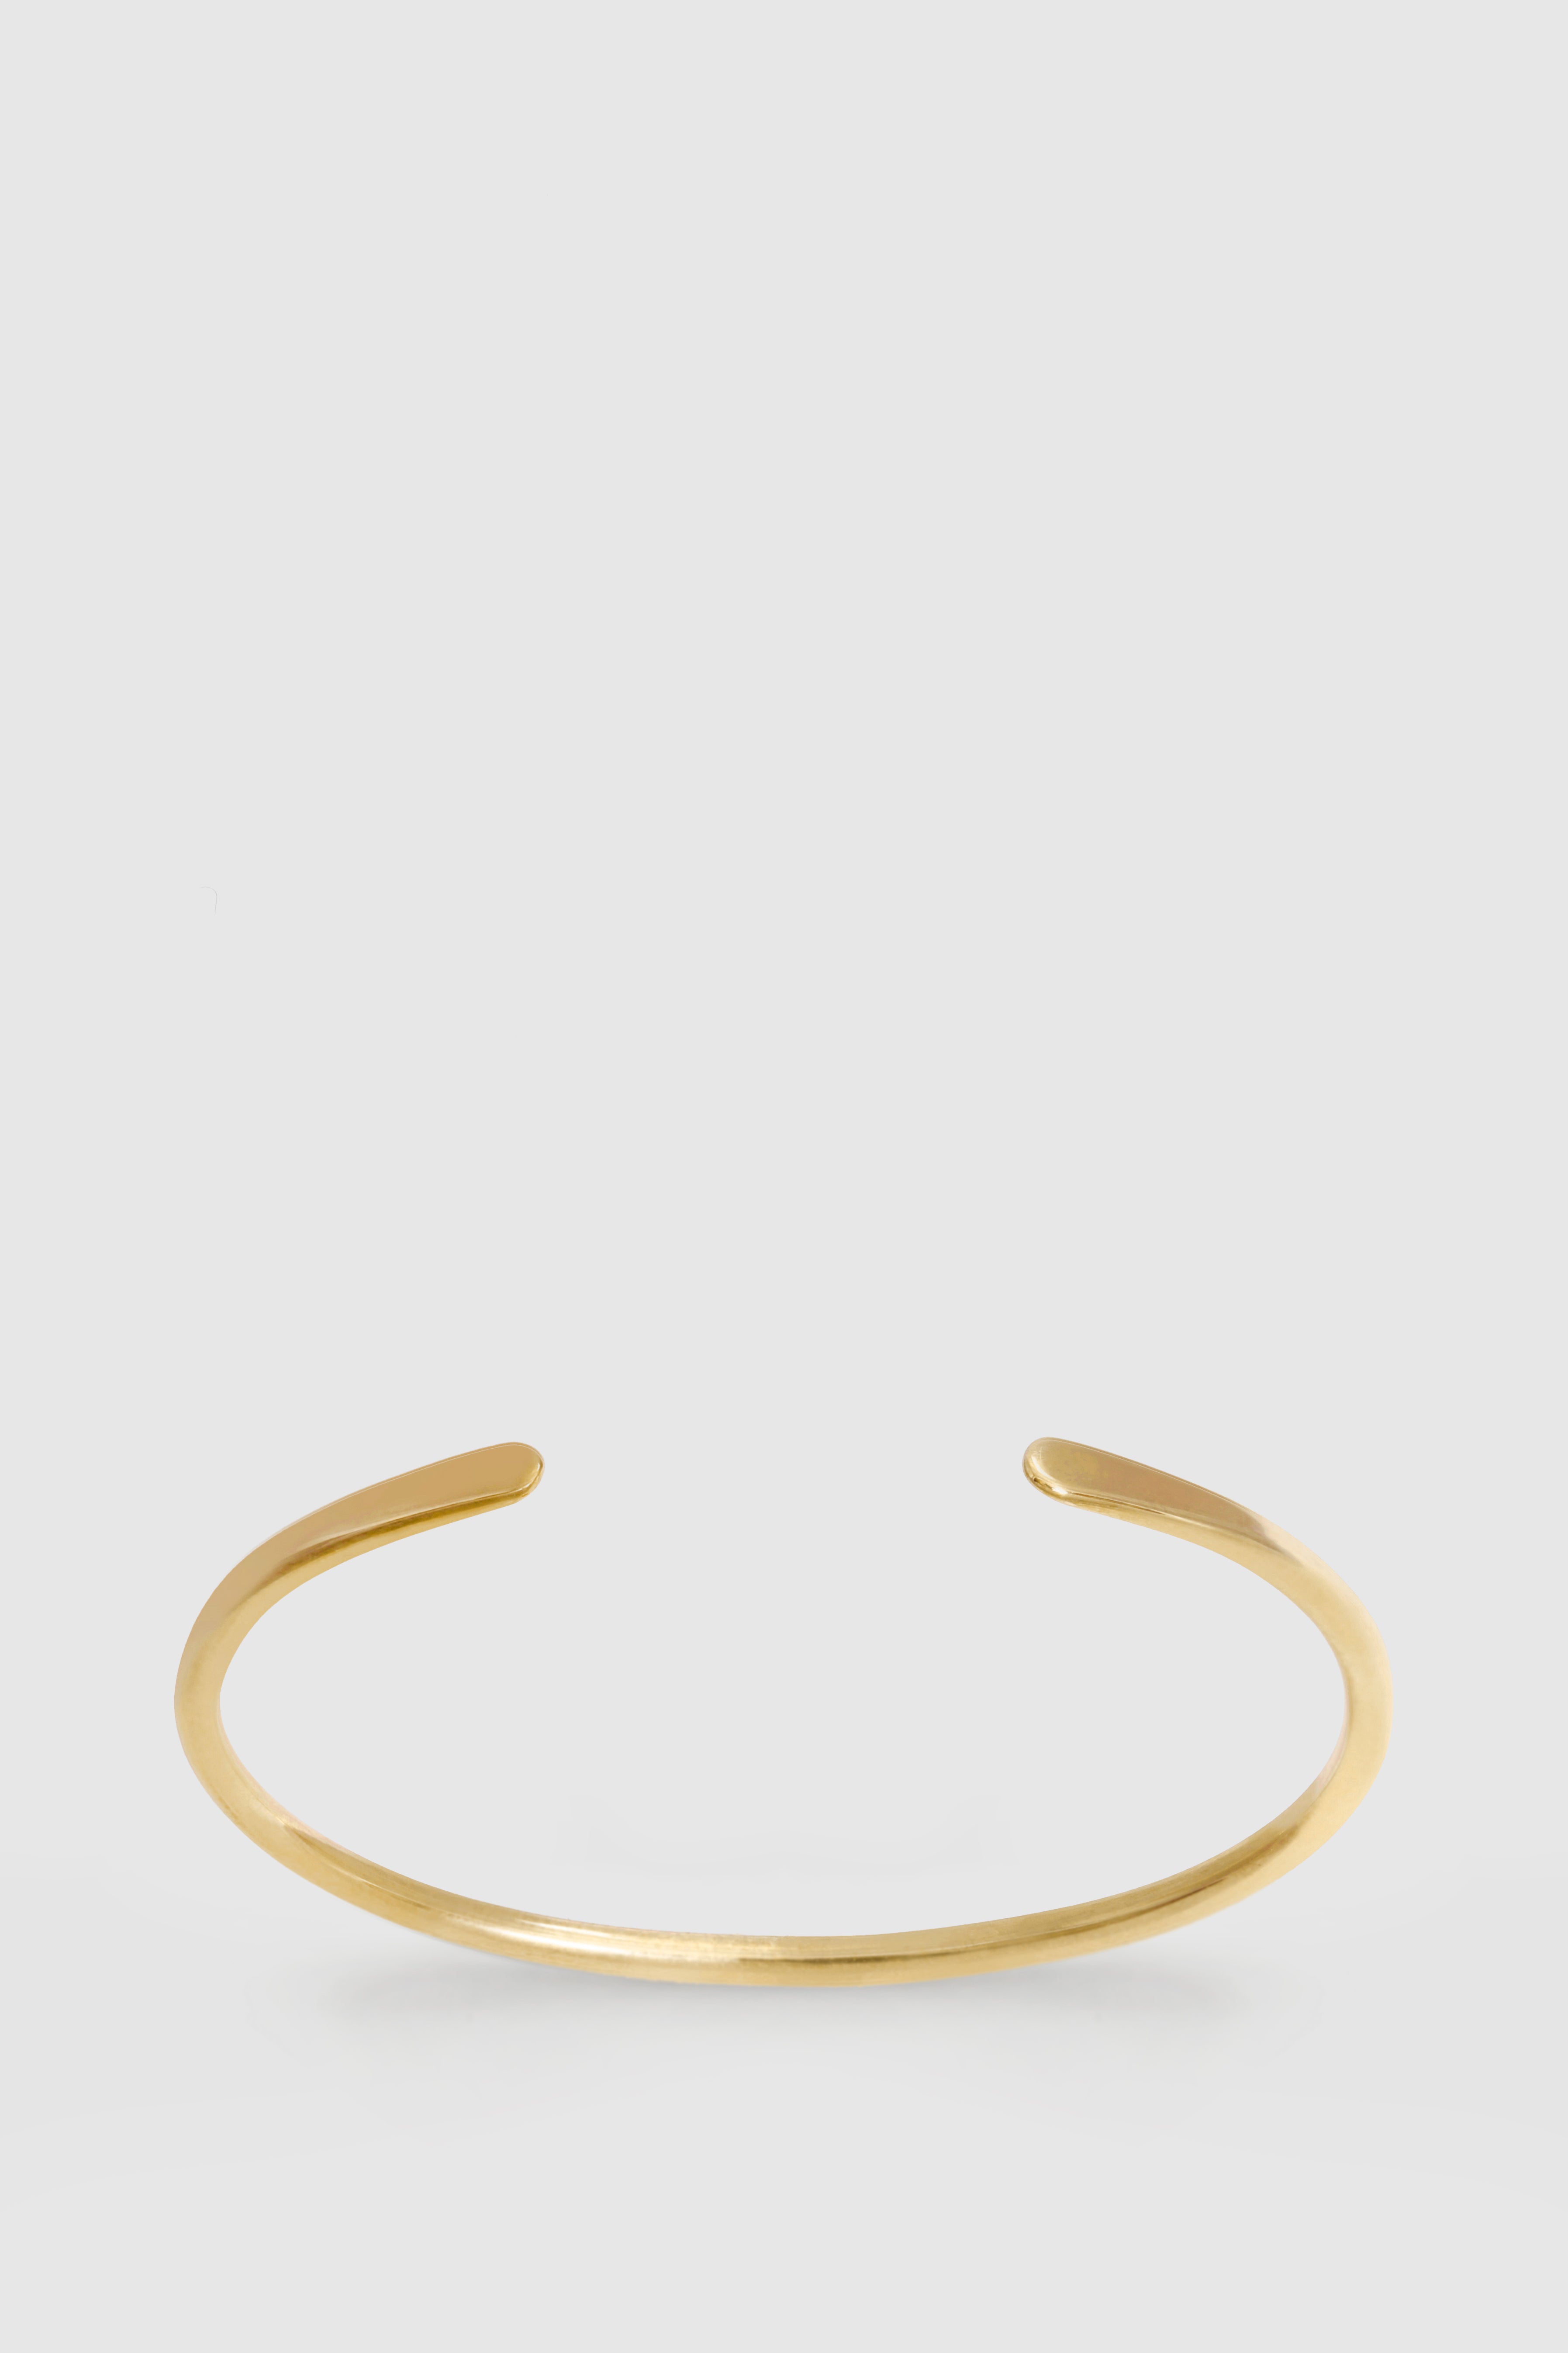 Paparazzi - Cool and CONNECTED - Brass Bracelet | Fashion Fabulous Jewelry